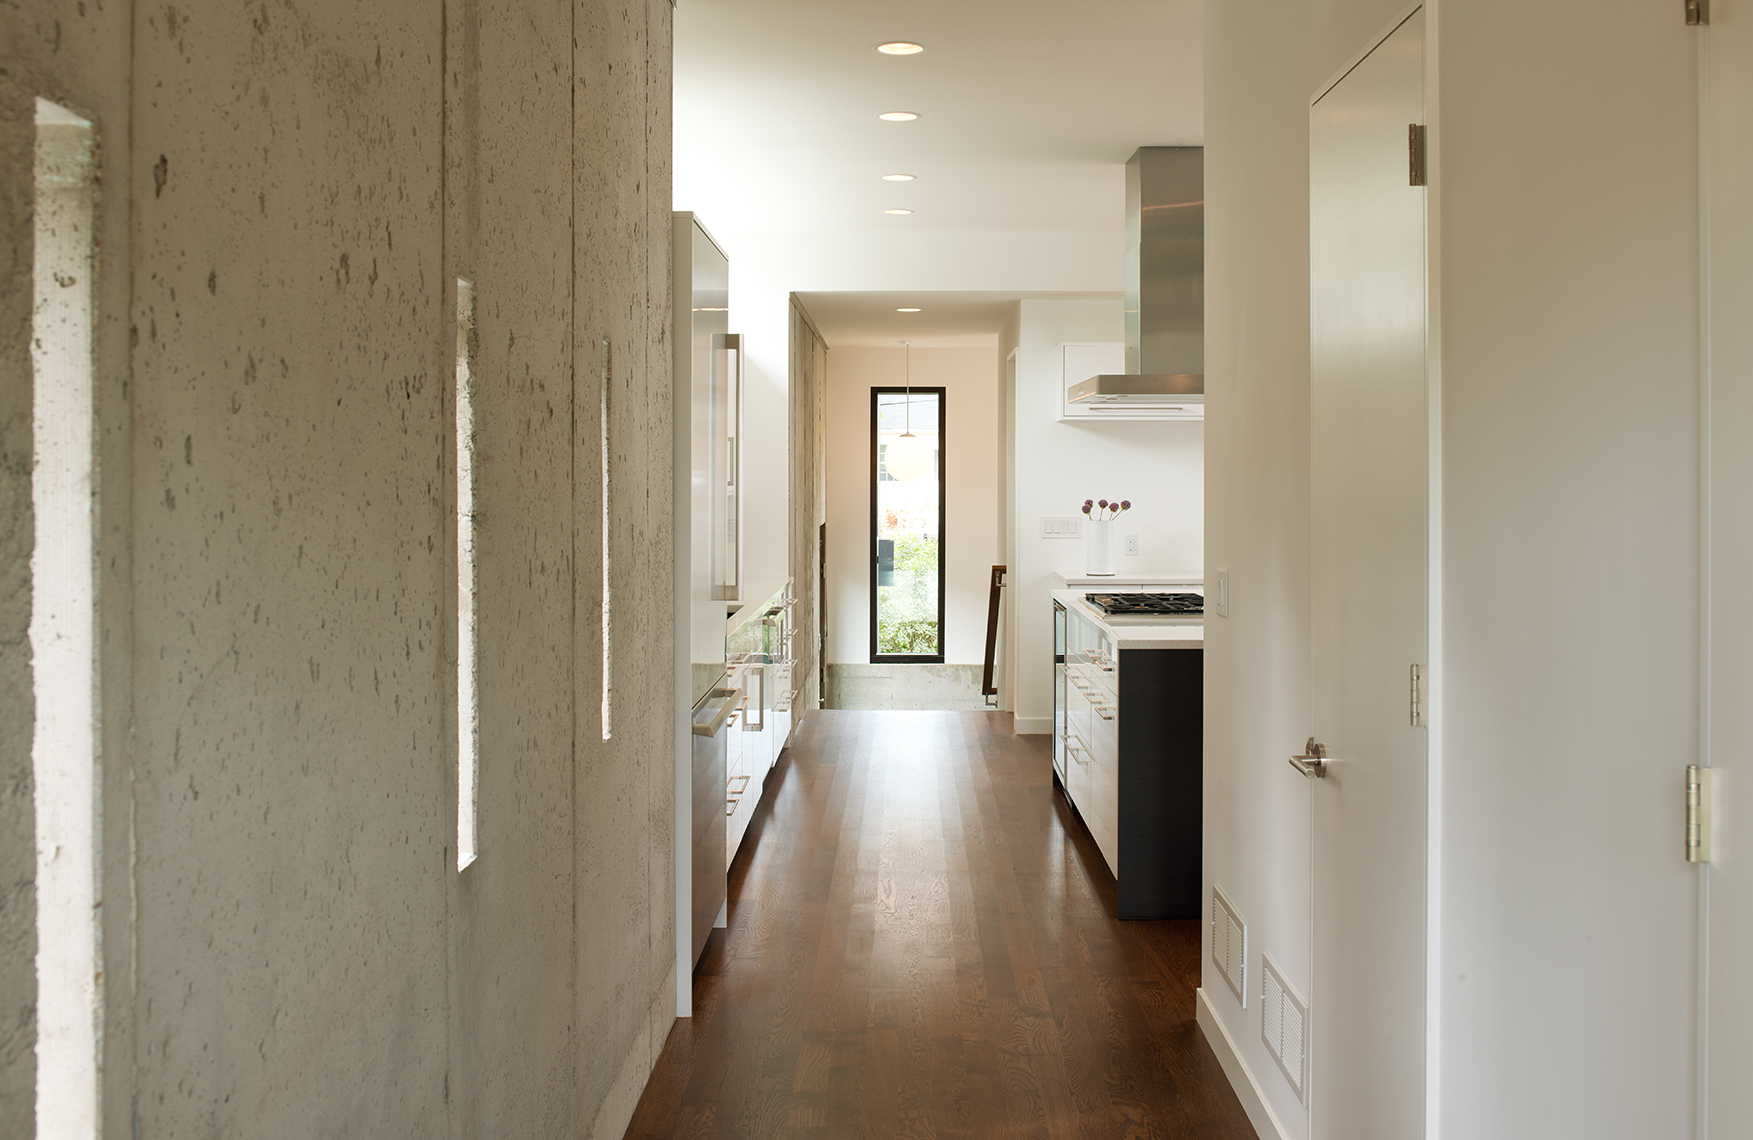 Hallway through kitchen on modern home remodel with exposed concrete wall